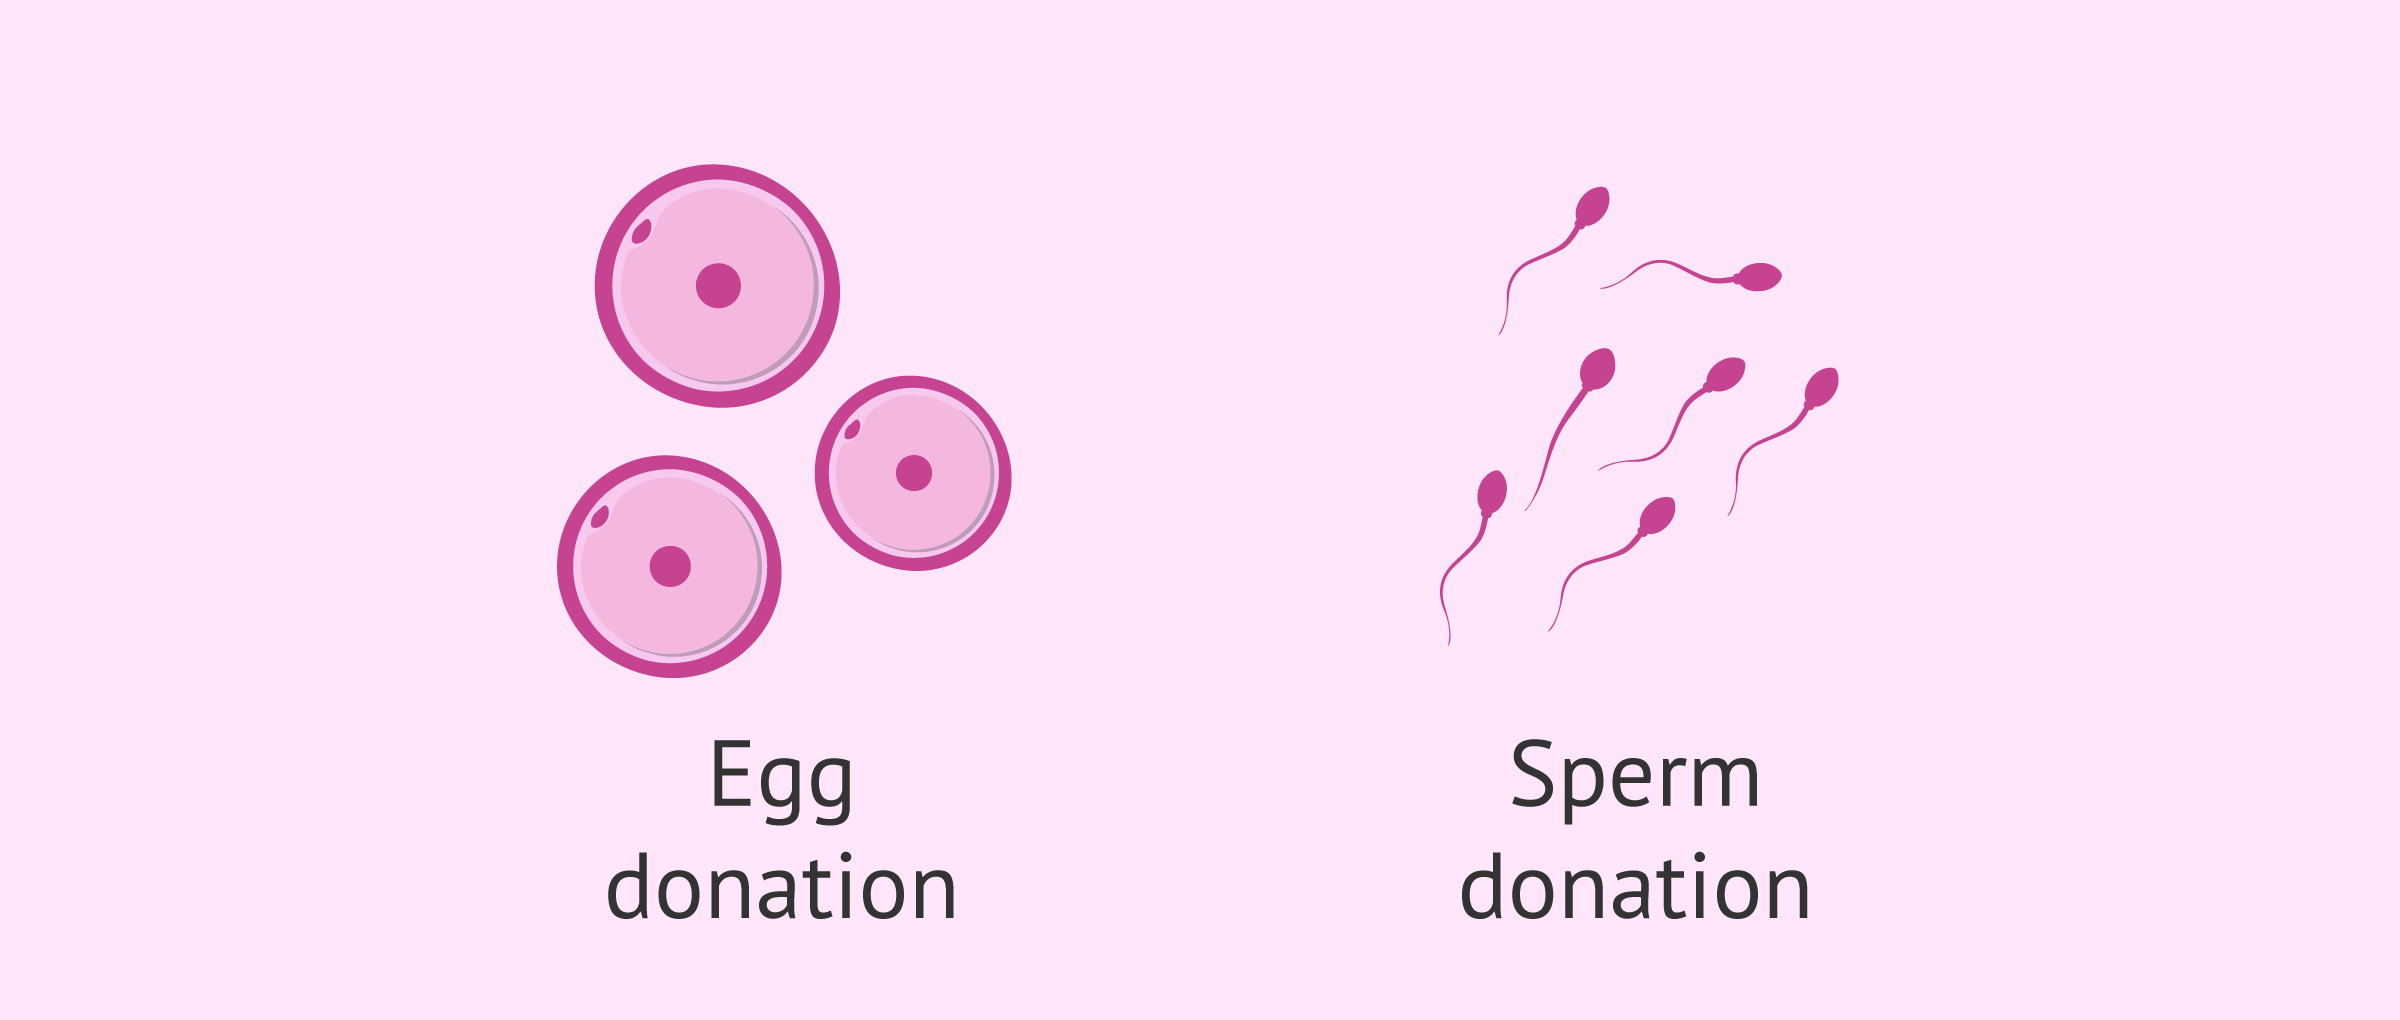 Gamete donation: Egg and Sperm